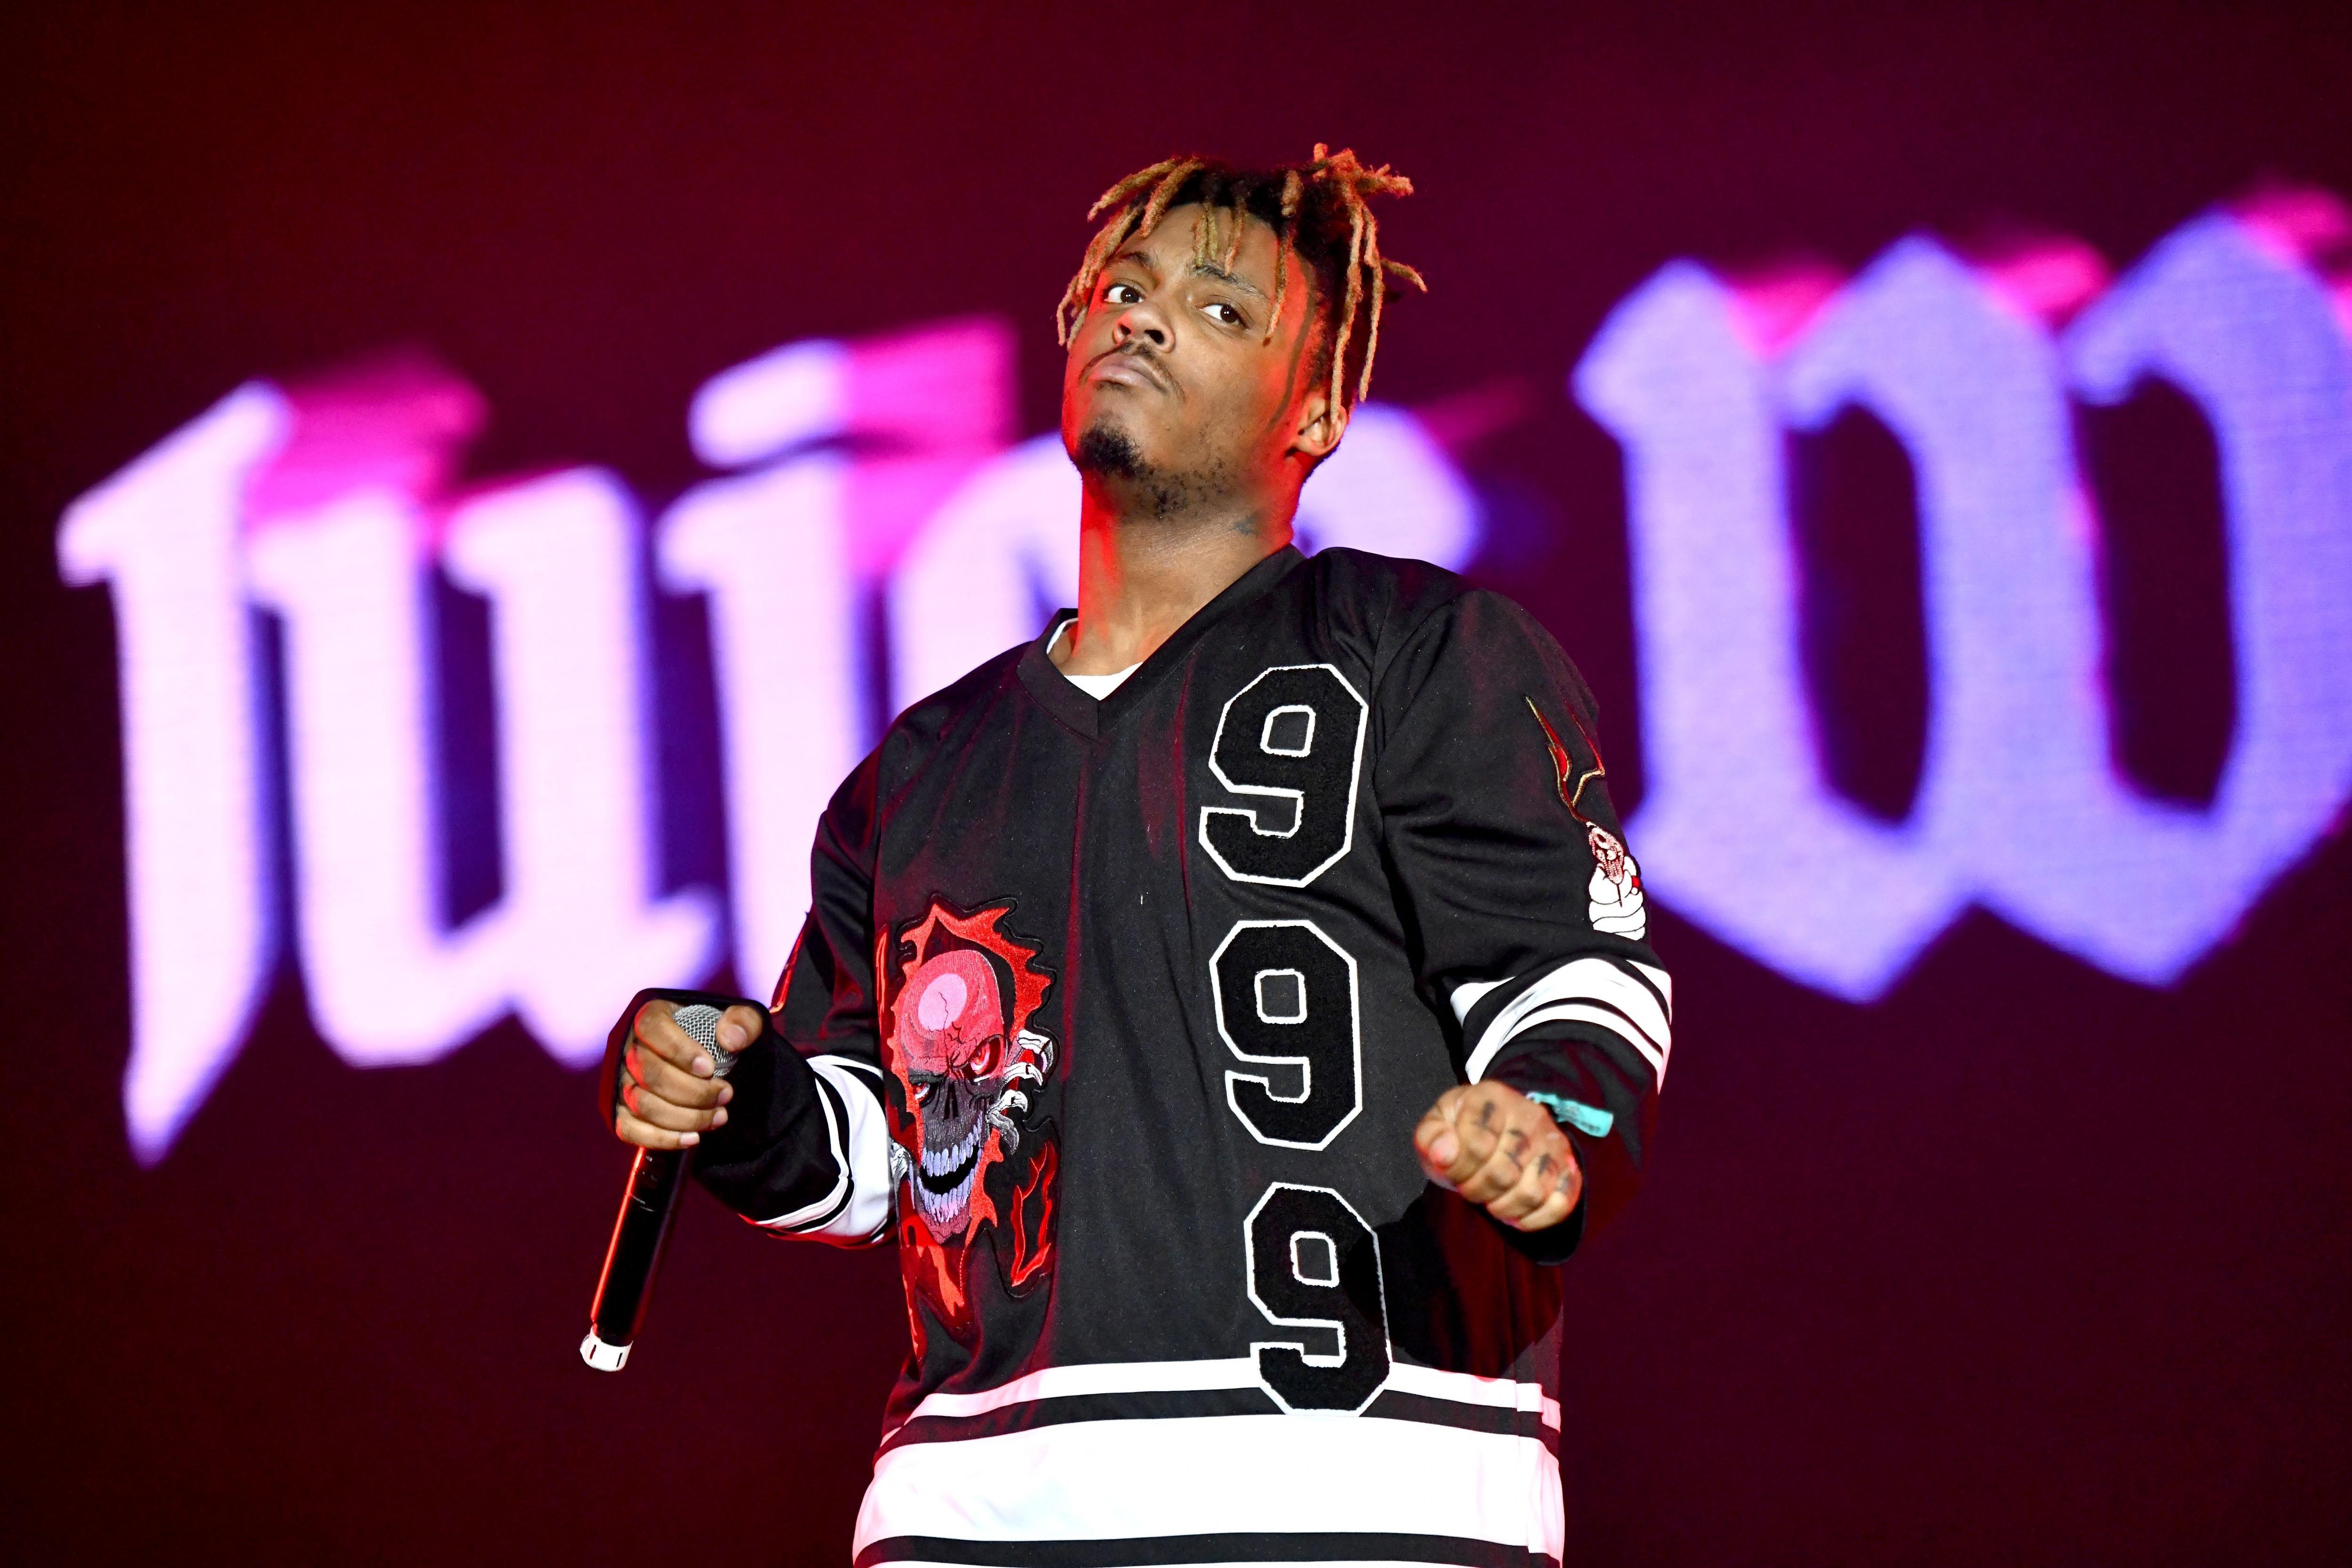 Juice Wrld death: Drake, Travis Scott and Chance the Rapper lead tributes  after rapper's death aged 21, The Independent